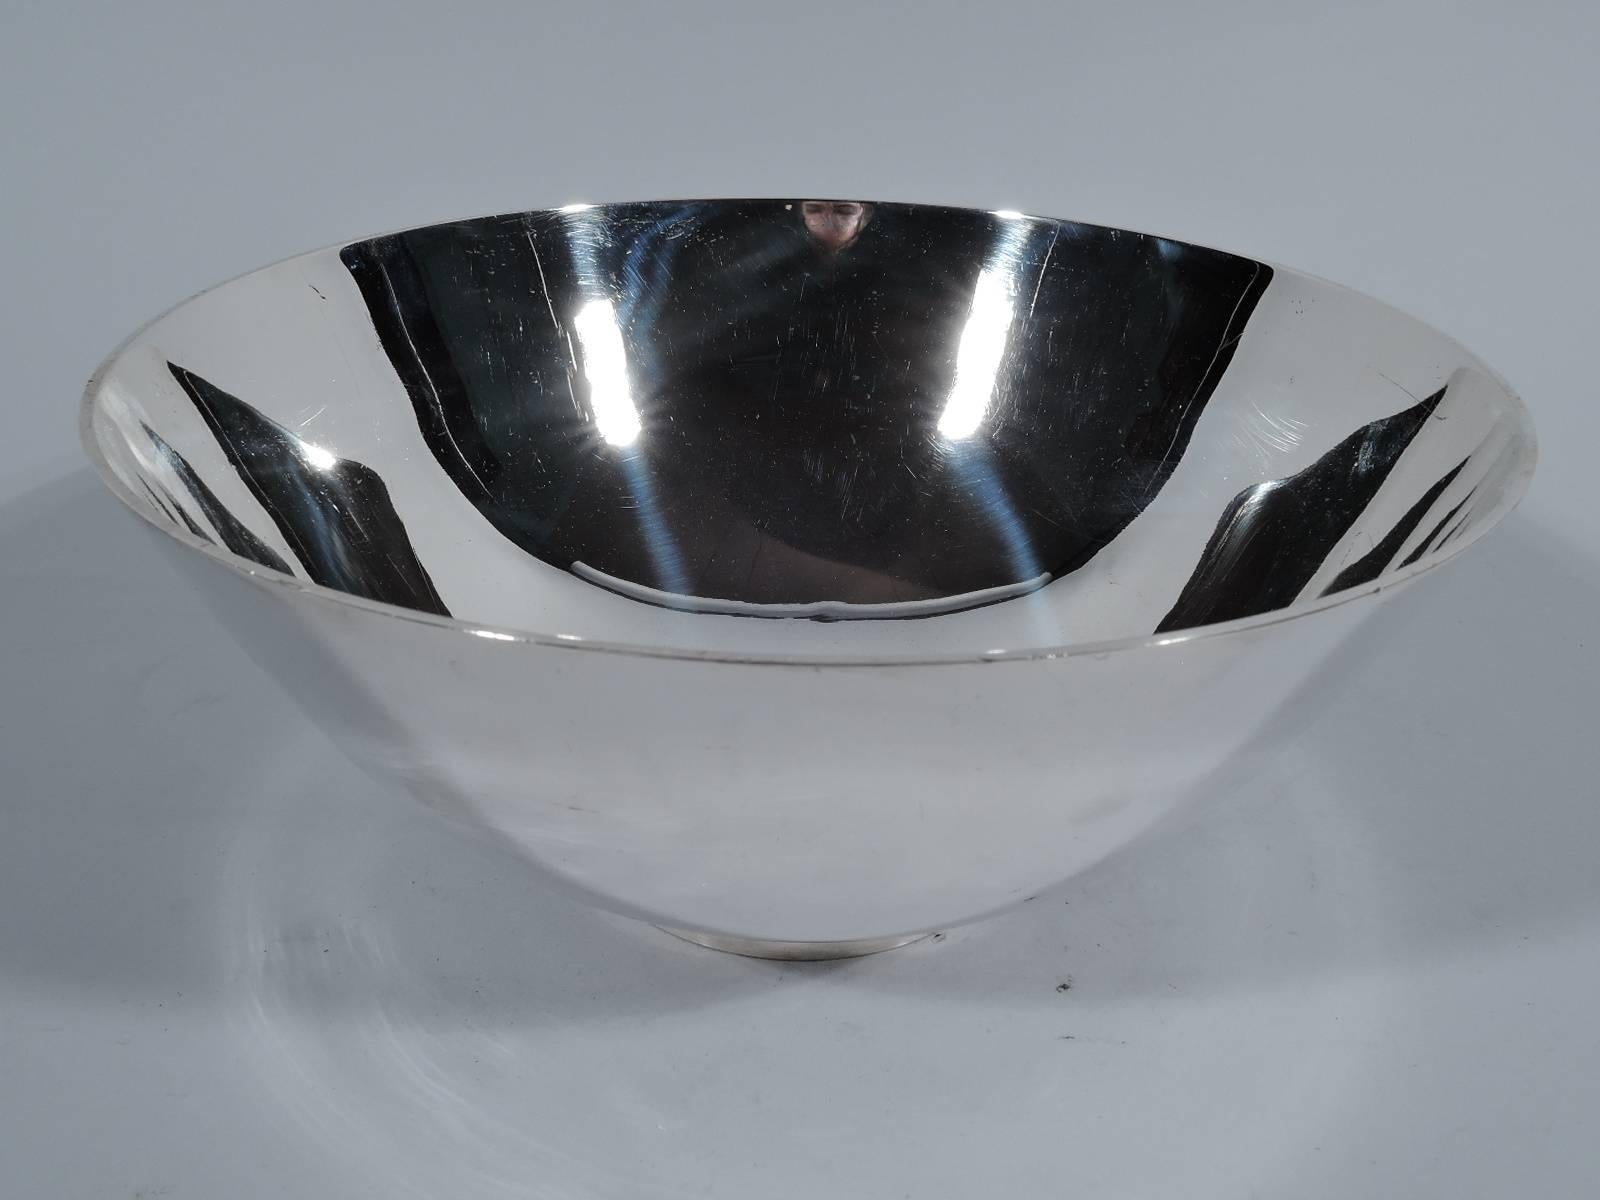 American Colonial sterling silver bowl. Made by Tiffany in New York. Bowl has curved sides and straight circular foot. Spare historic design that works equally well in Modern interiors. Hallmark includes pattern no. 19750, director’s letter M